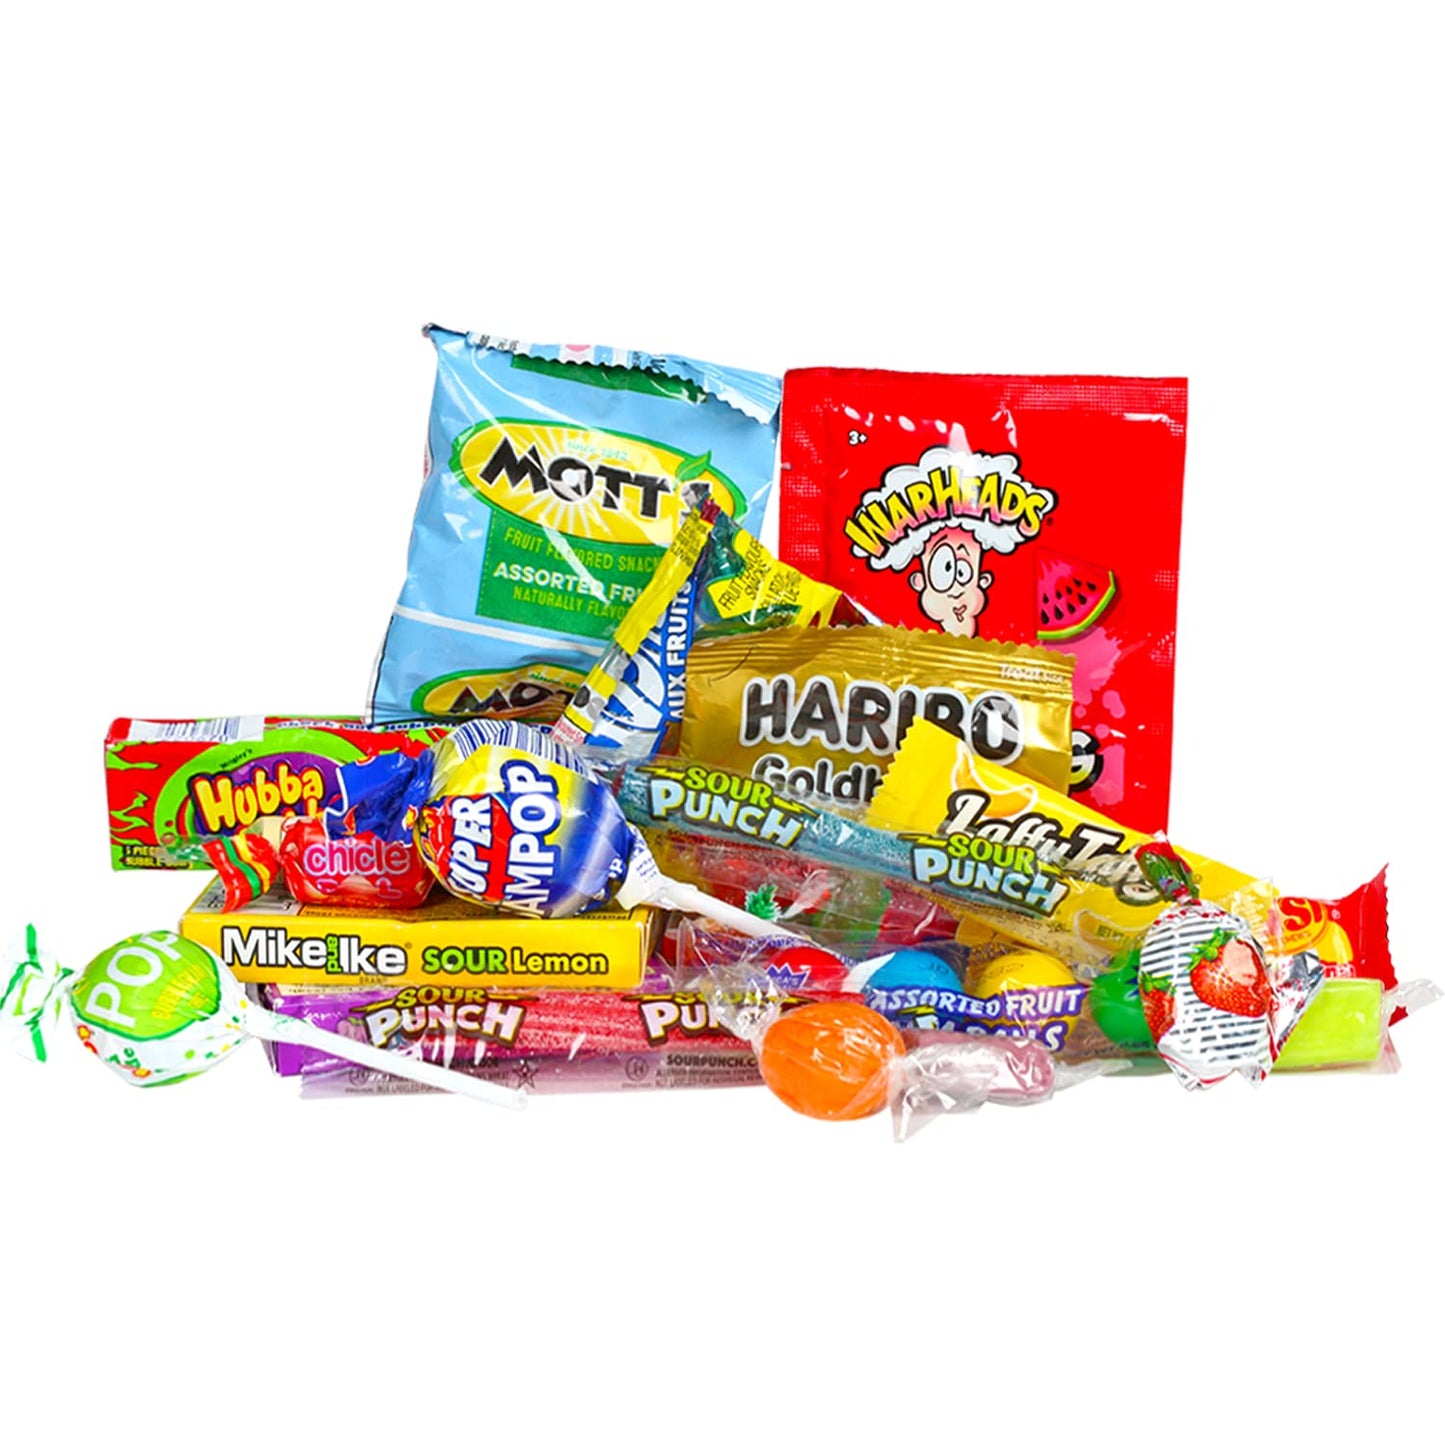 Assorted Candy - 4 Pounds - Goodie Bag Stuffers - Candy Variety Pack - Pinata Candy - Individually Wrapped Candies